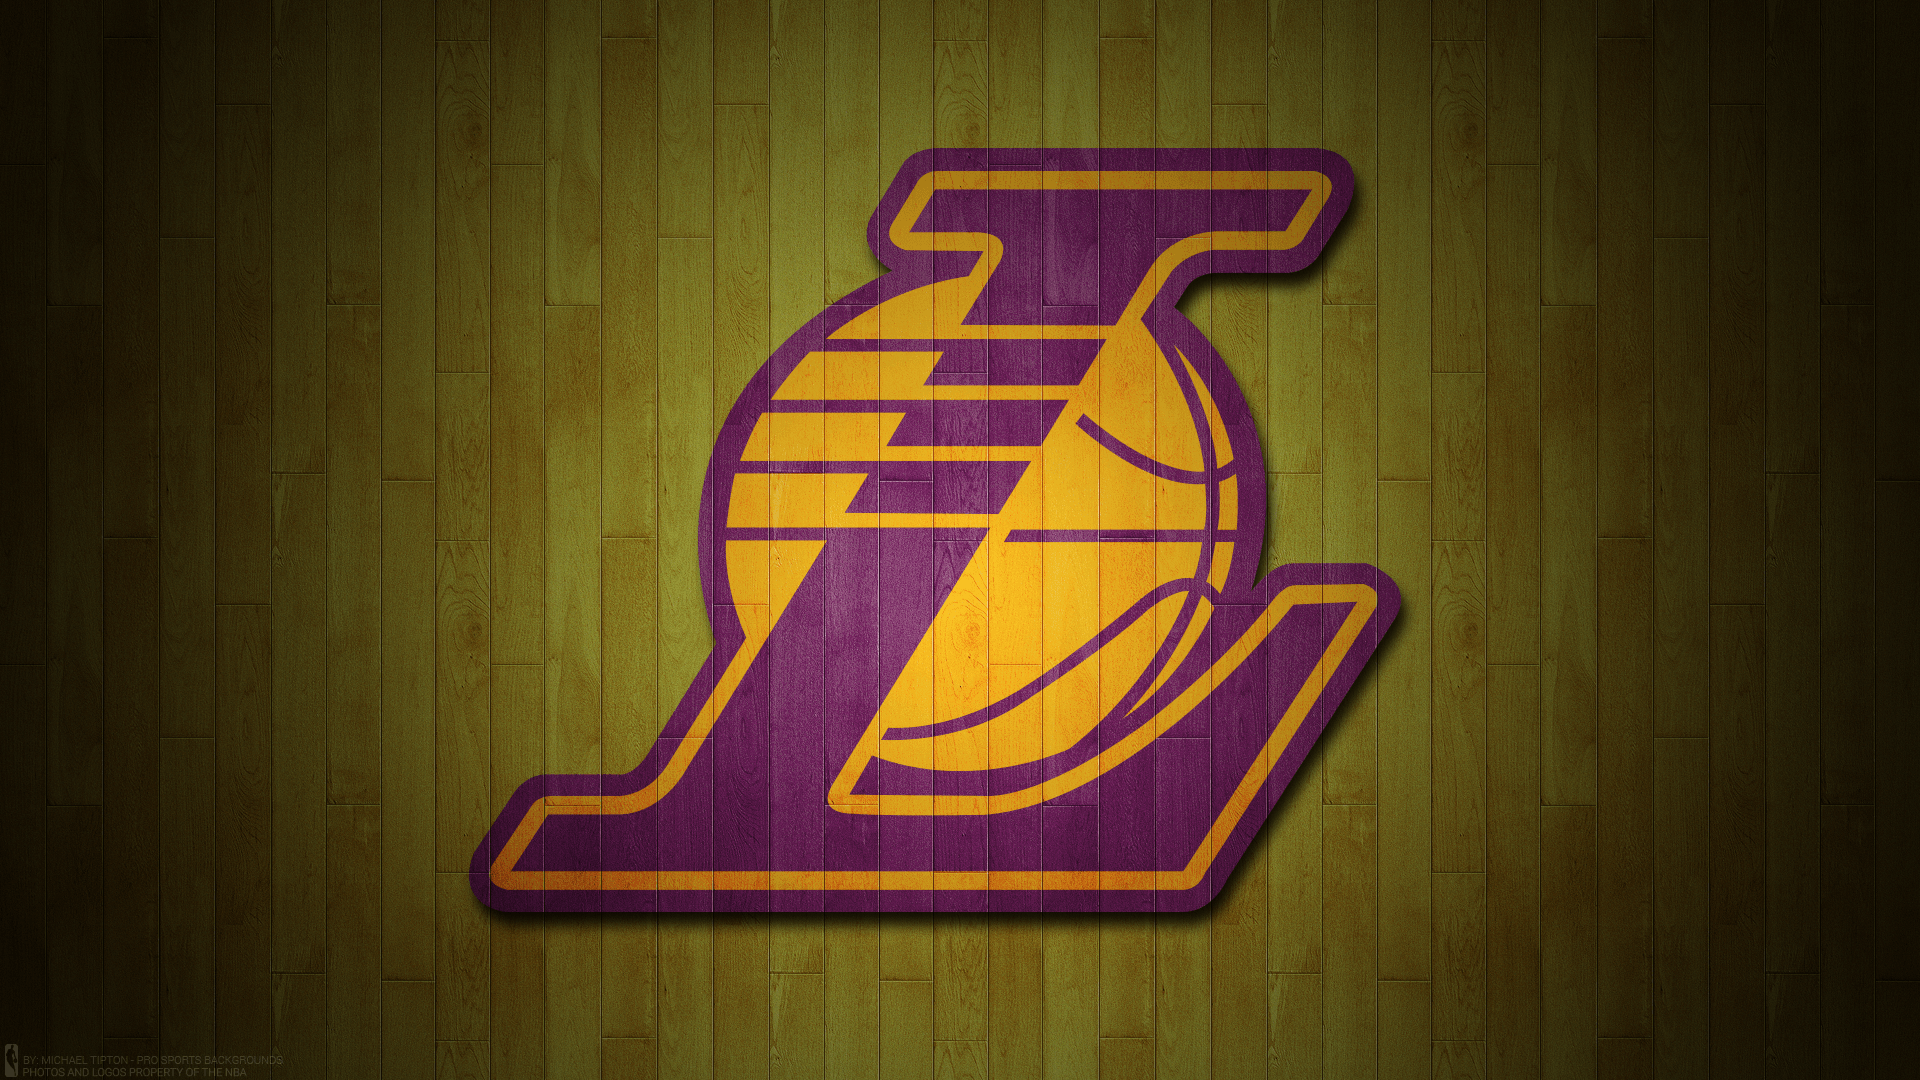 Los Angeles Lakers Wallpaper. iPhone. Android